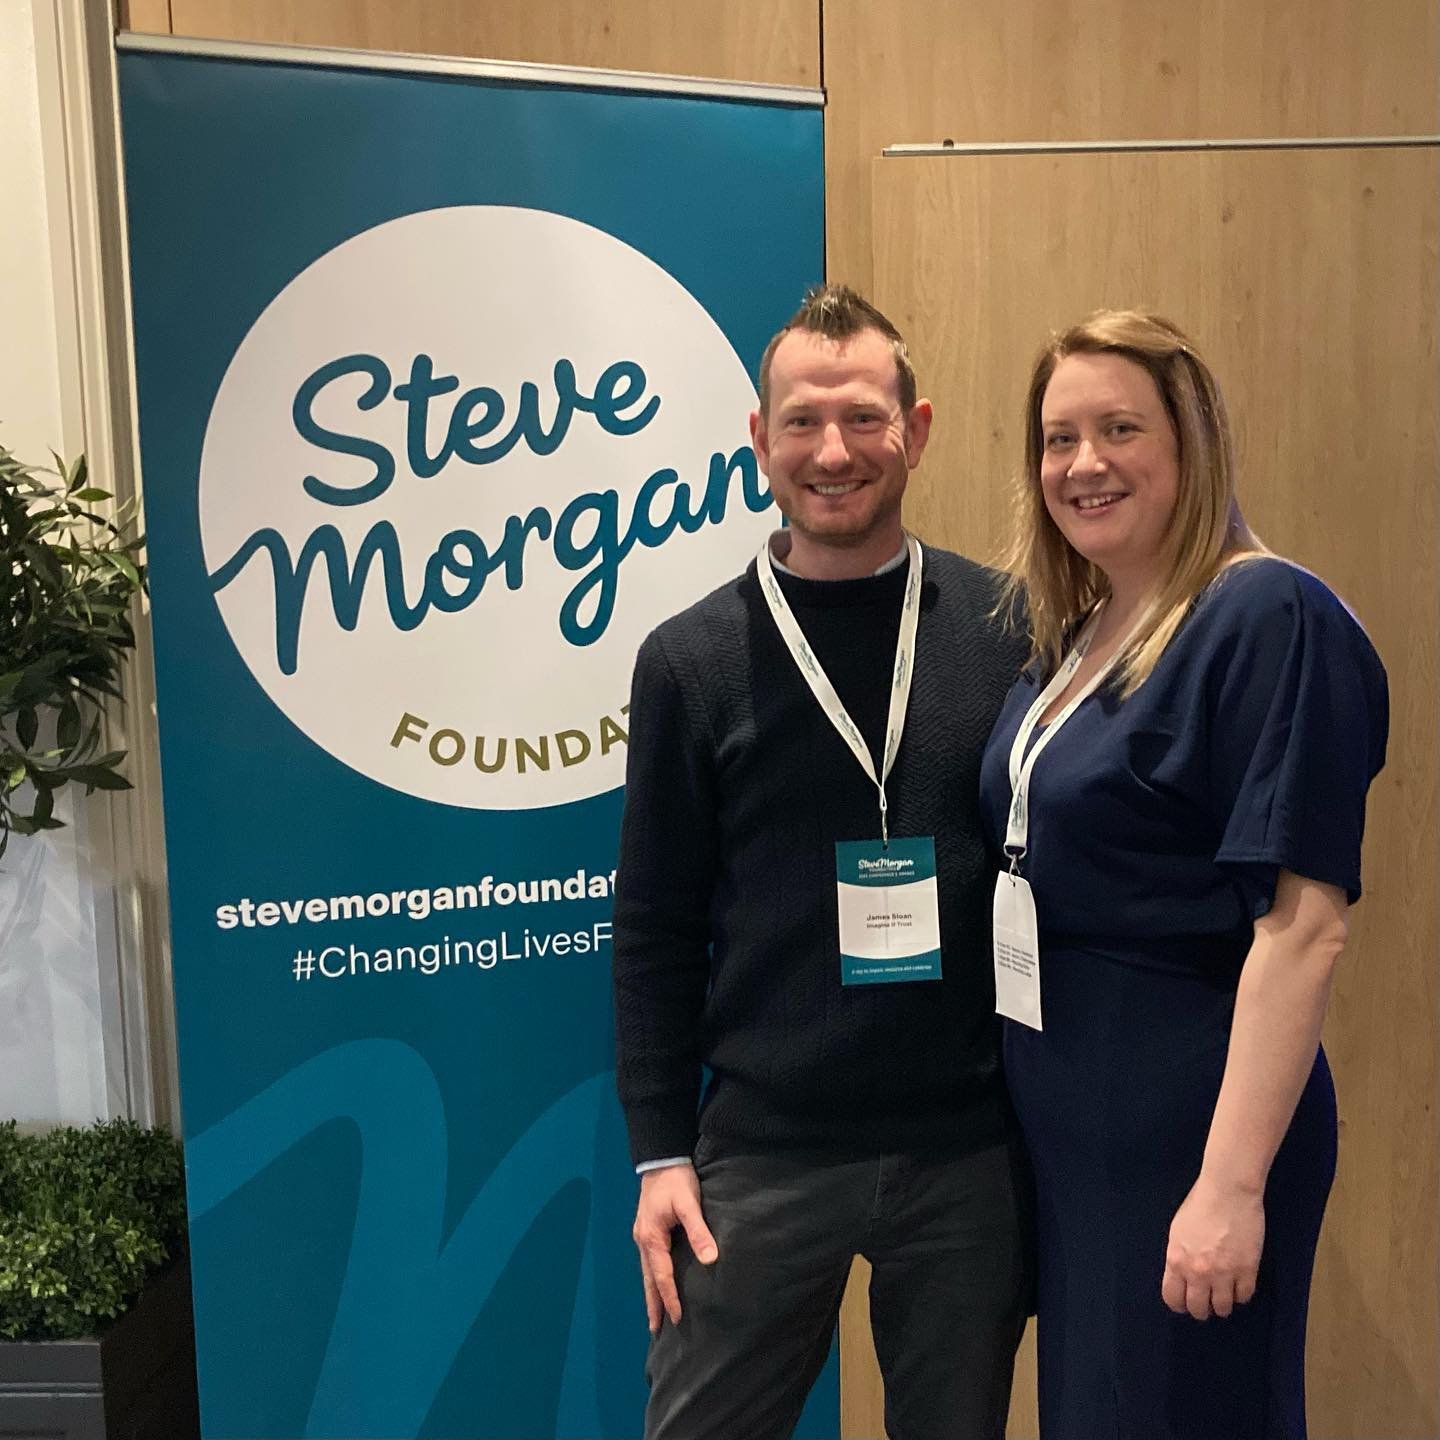 Jemma and James spent the day at the Steve Morgan Foundation awards today where Imagine If were runners up in the category of best small/medium charity or social enterprise. We&rsquo;re so grateful to the foundation for their support over the years a